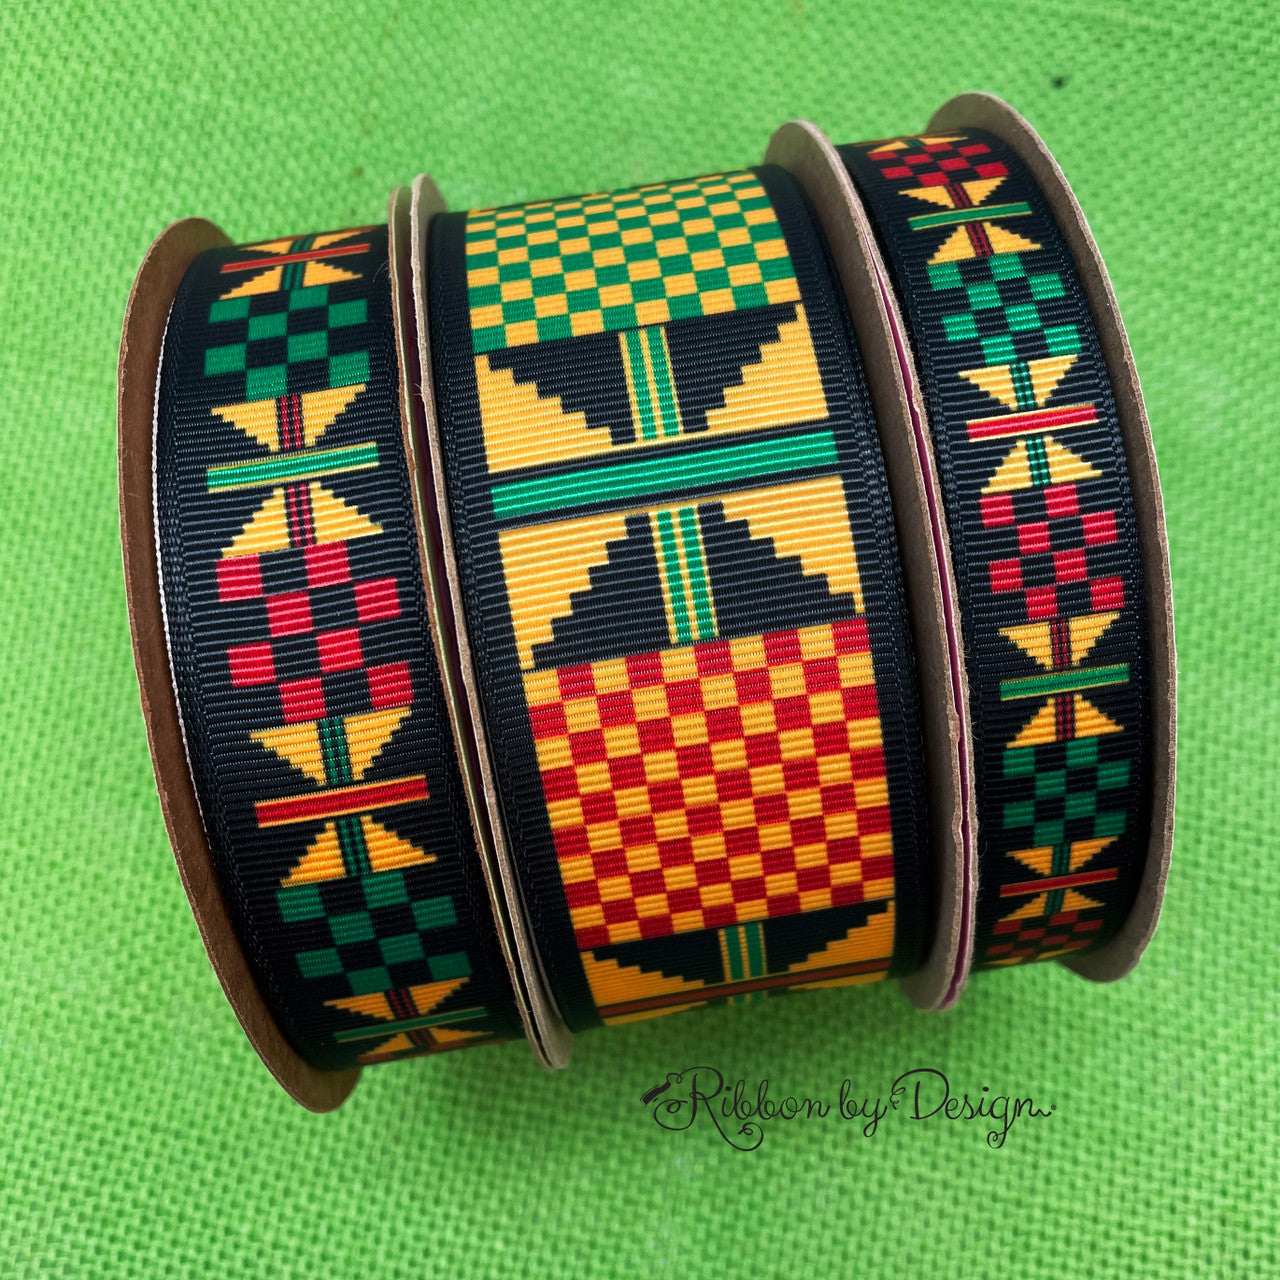 Our African Kente design is available in three widths! There is a size perfect for your gift giving and  crafting needs!